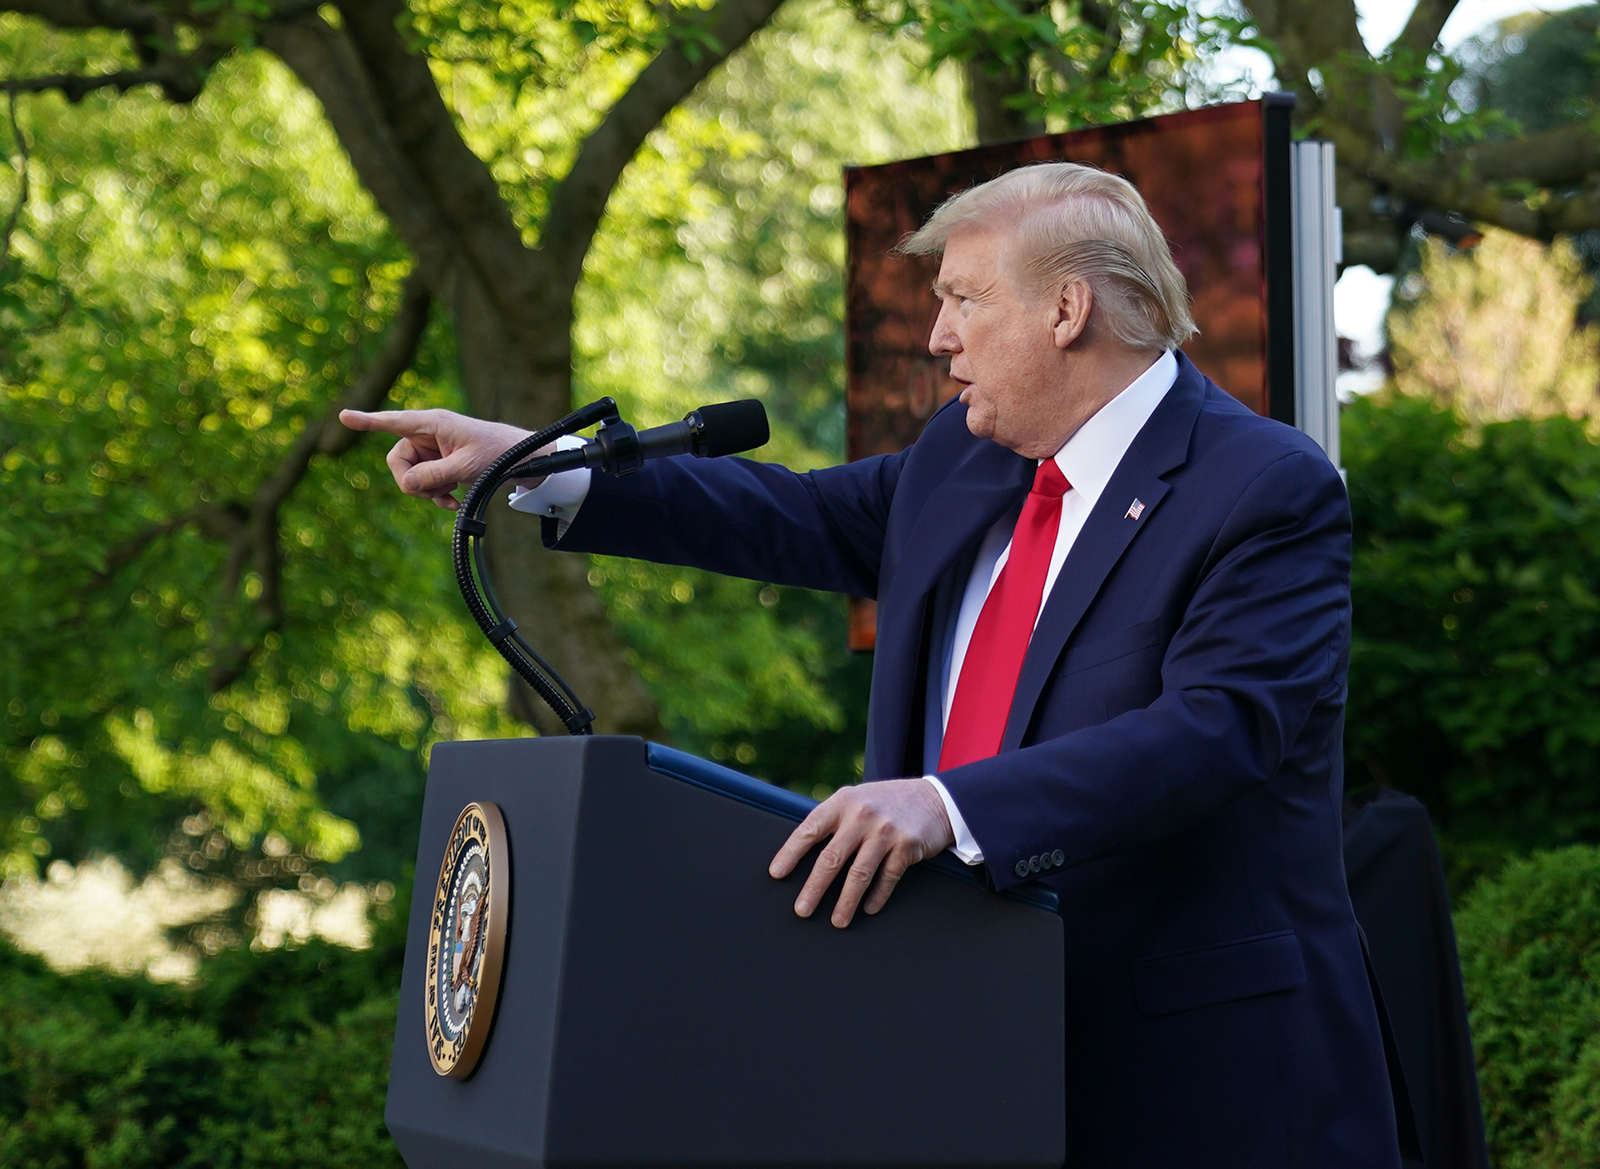 President Donald Trump speaks during a news conference on Covid-19, in the Rose Garden of the White House in Washington, DC on April 27.